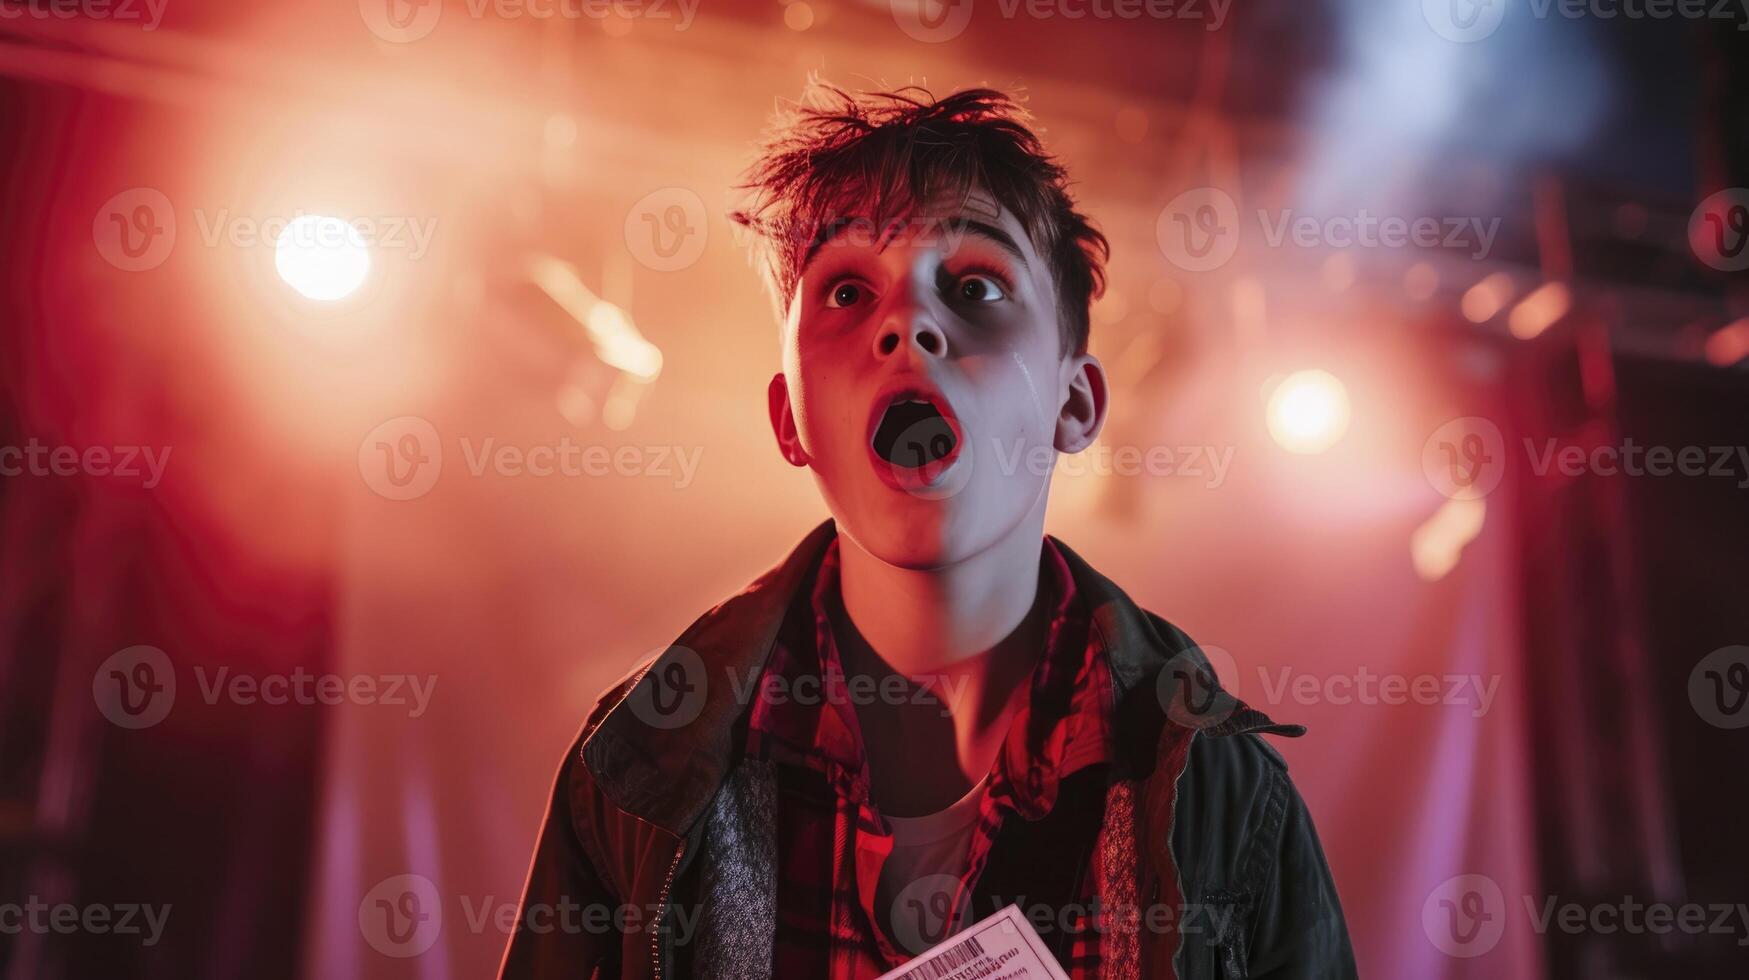 AI generated A teenage boy from Europe, with a surprised expression and a concert ticket, is attending his first rock concert in London, England photo